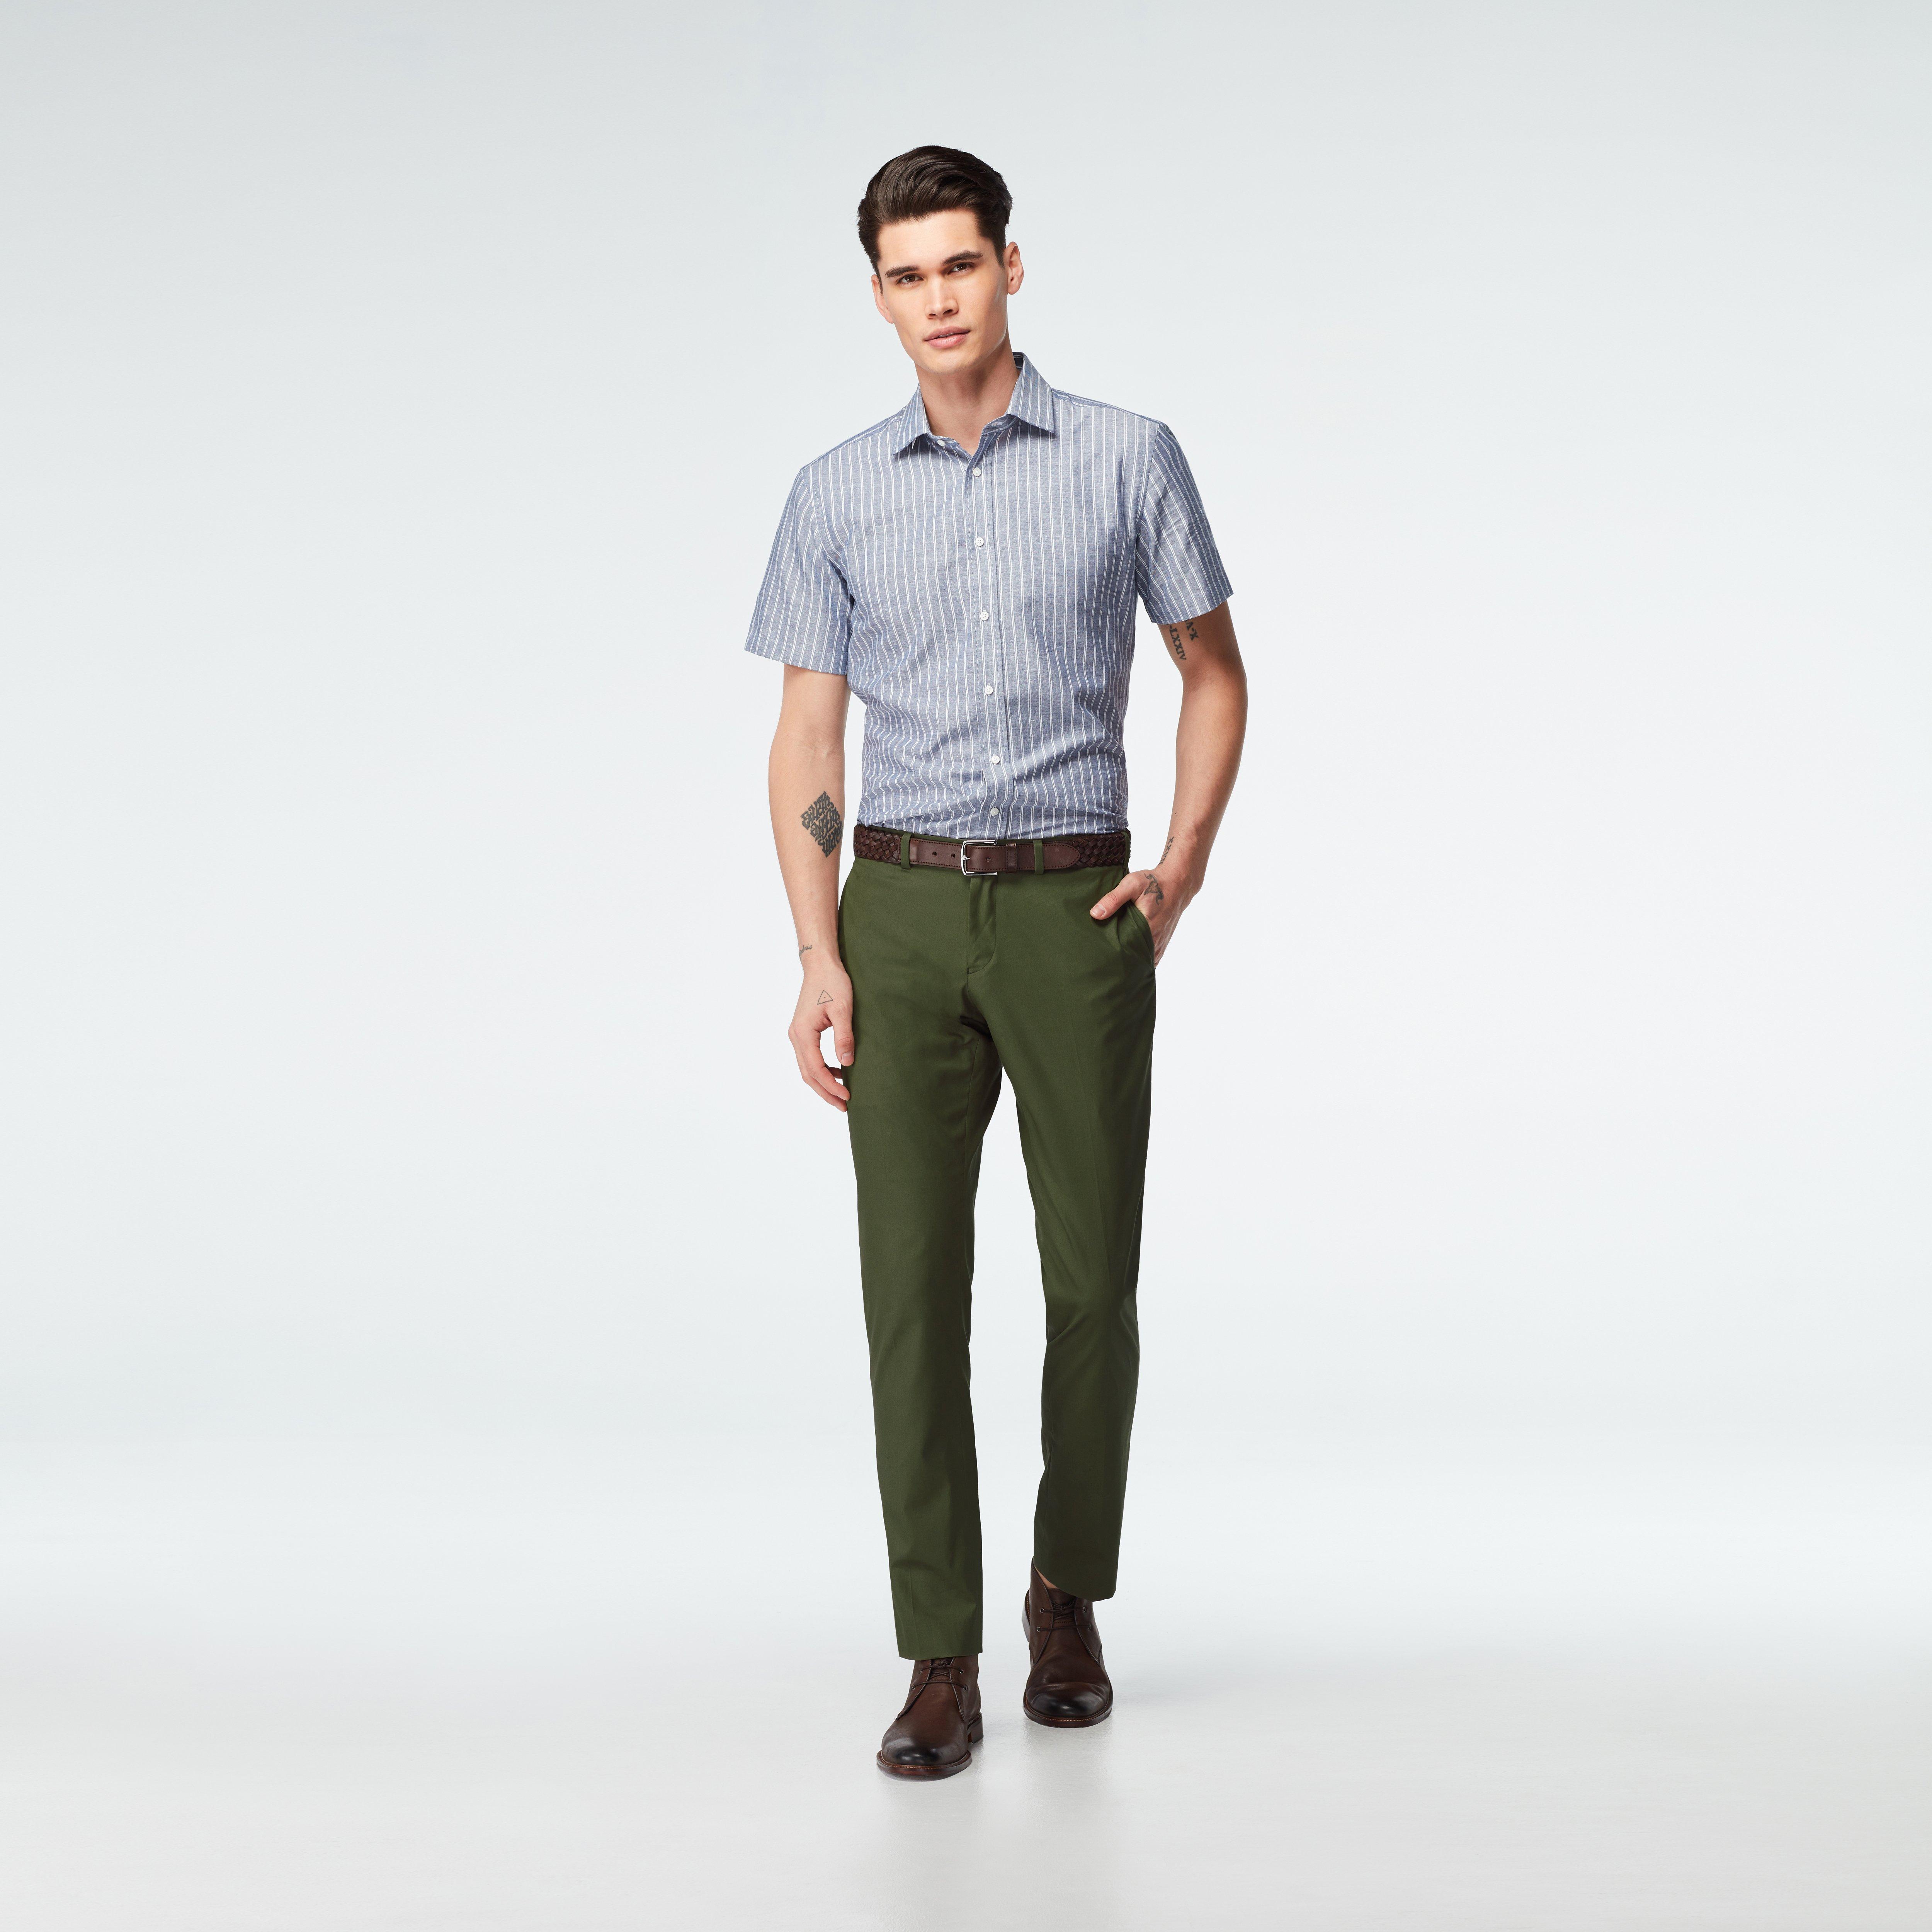 Men's Style | What to Wear with Army Green pants – Tonywell